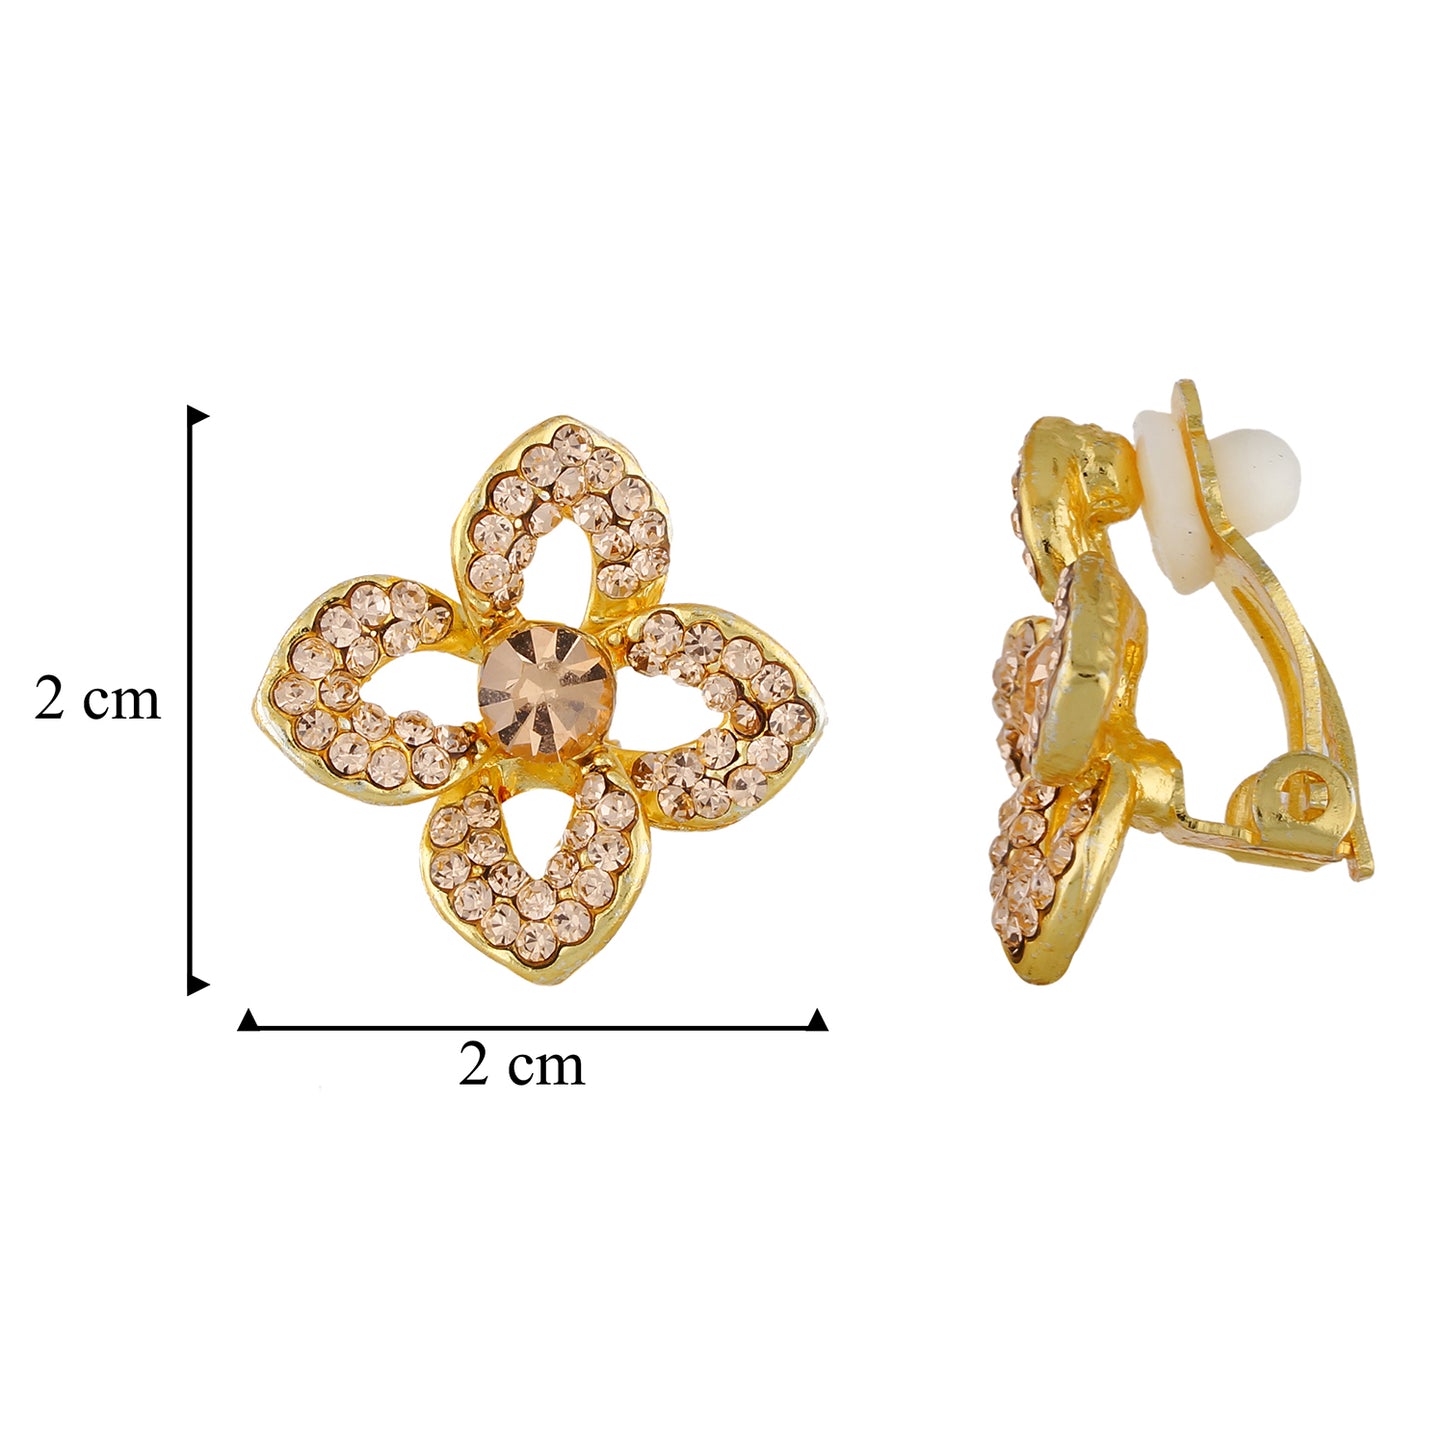 Stylish Beige and Gold Colour Floral Shape Alloy Clip On Earrings for Girls with on Pierced Ears